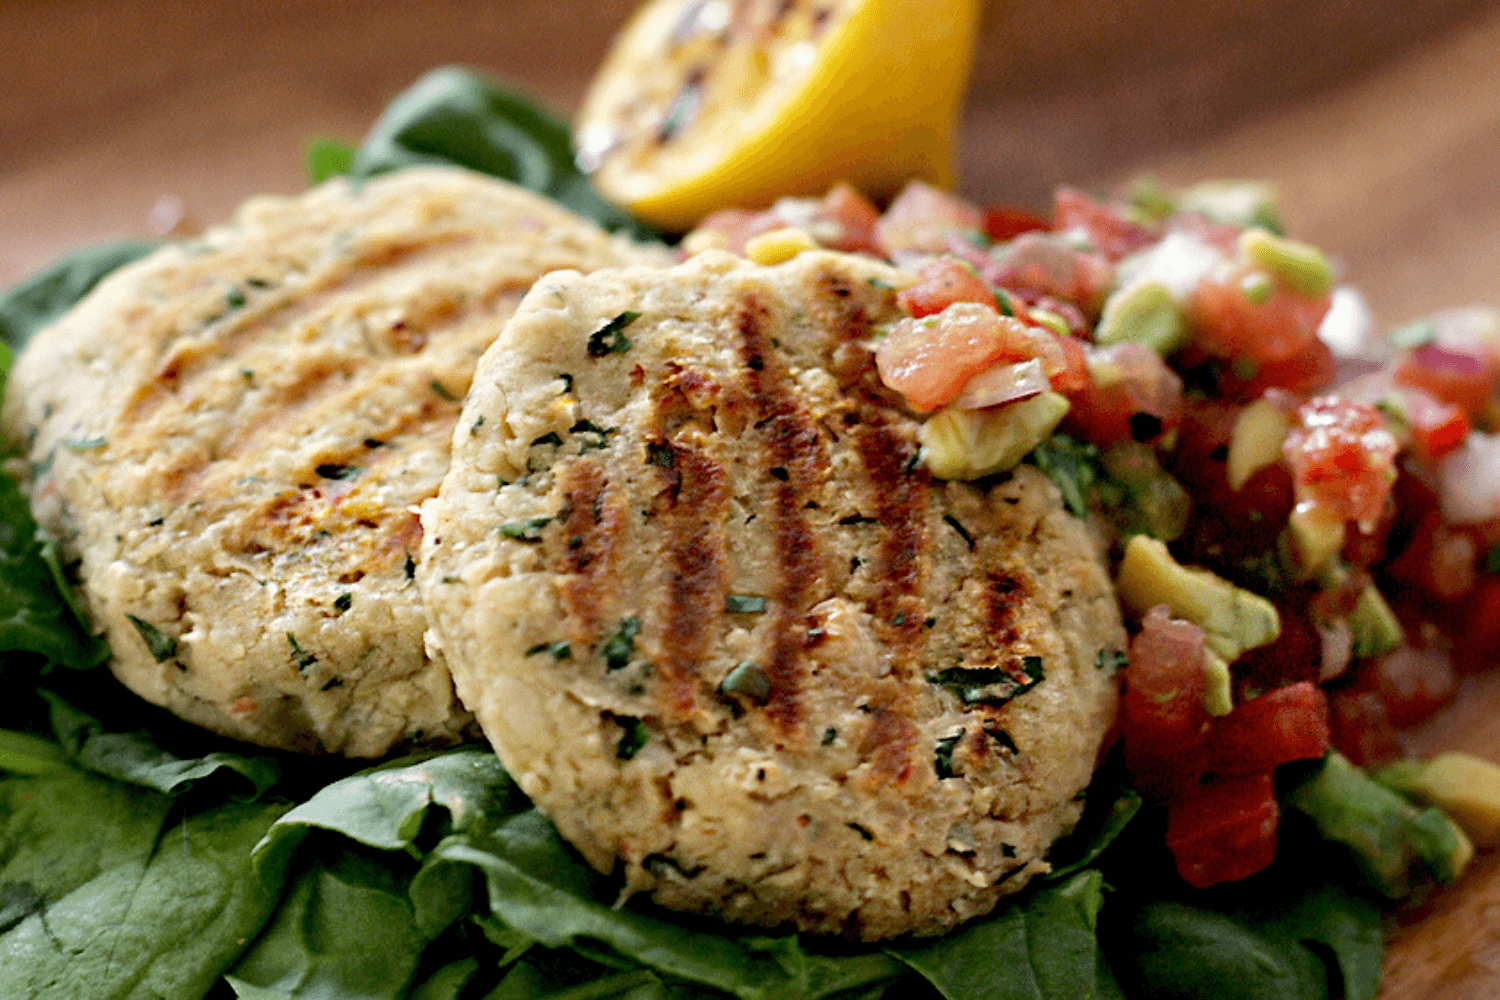 20 Meal Ideas Your Clients Can Grill This Summer: White Bean Burgers